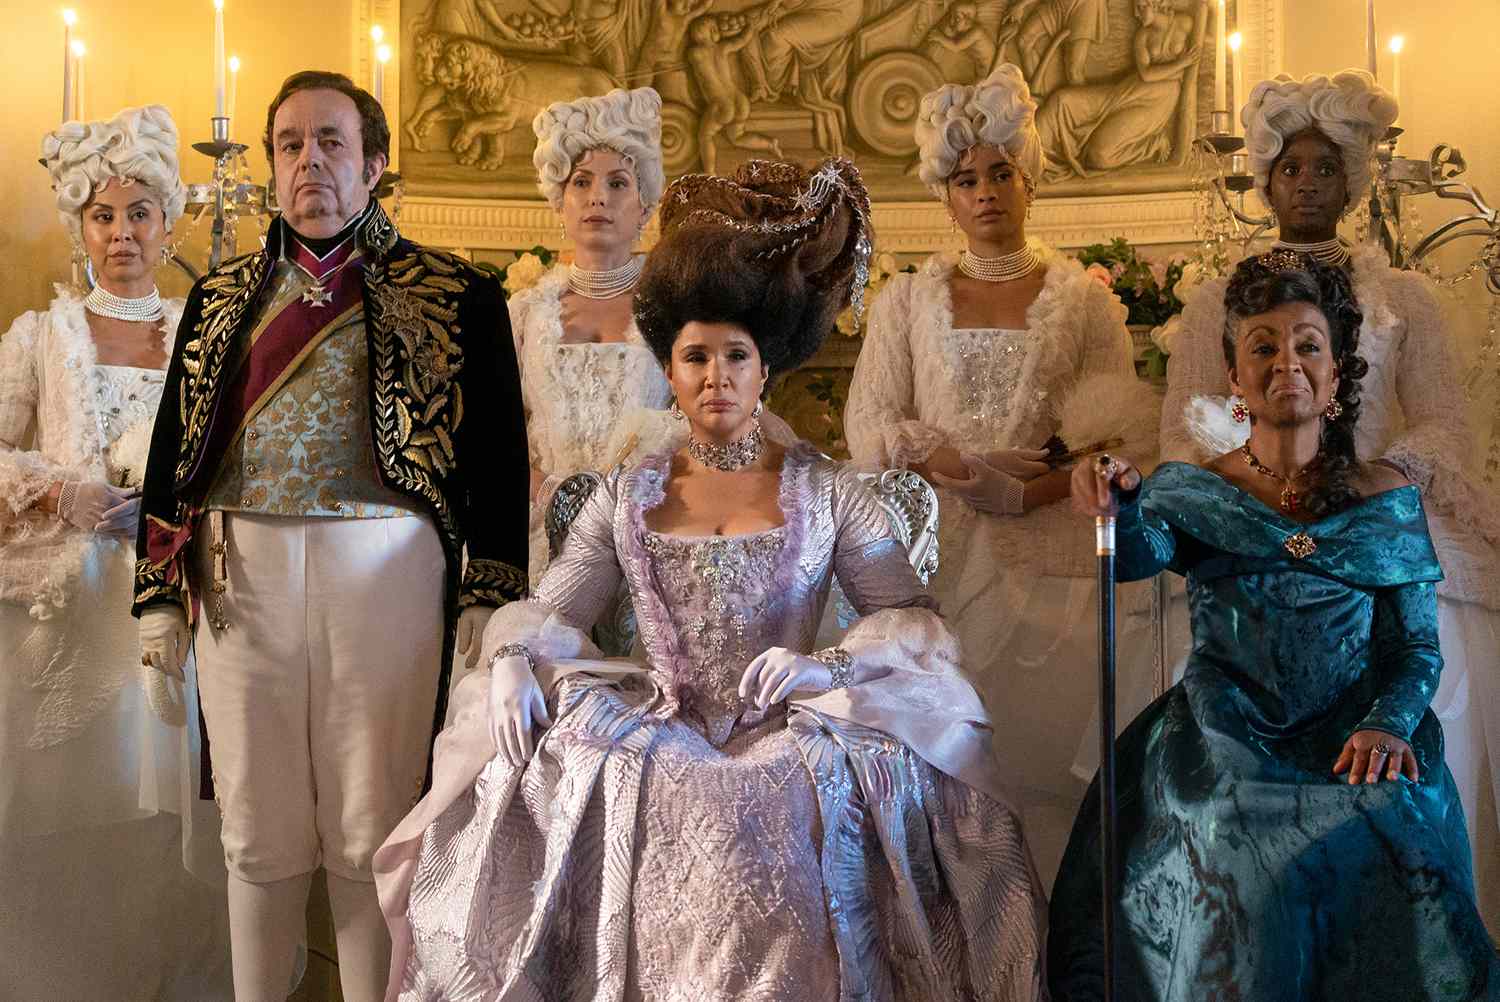 How Accurate Is 'Bridgerton'? We Asked a Regency Historian What the Series Gets Right (and Wrong)